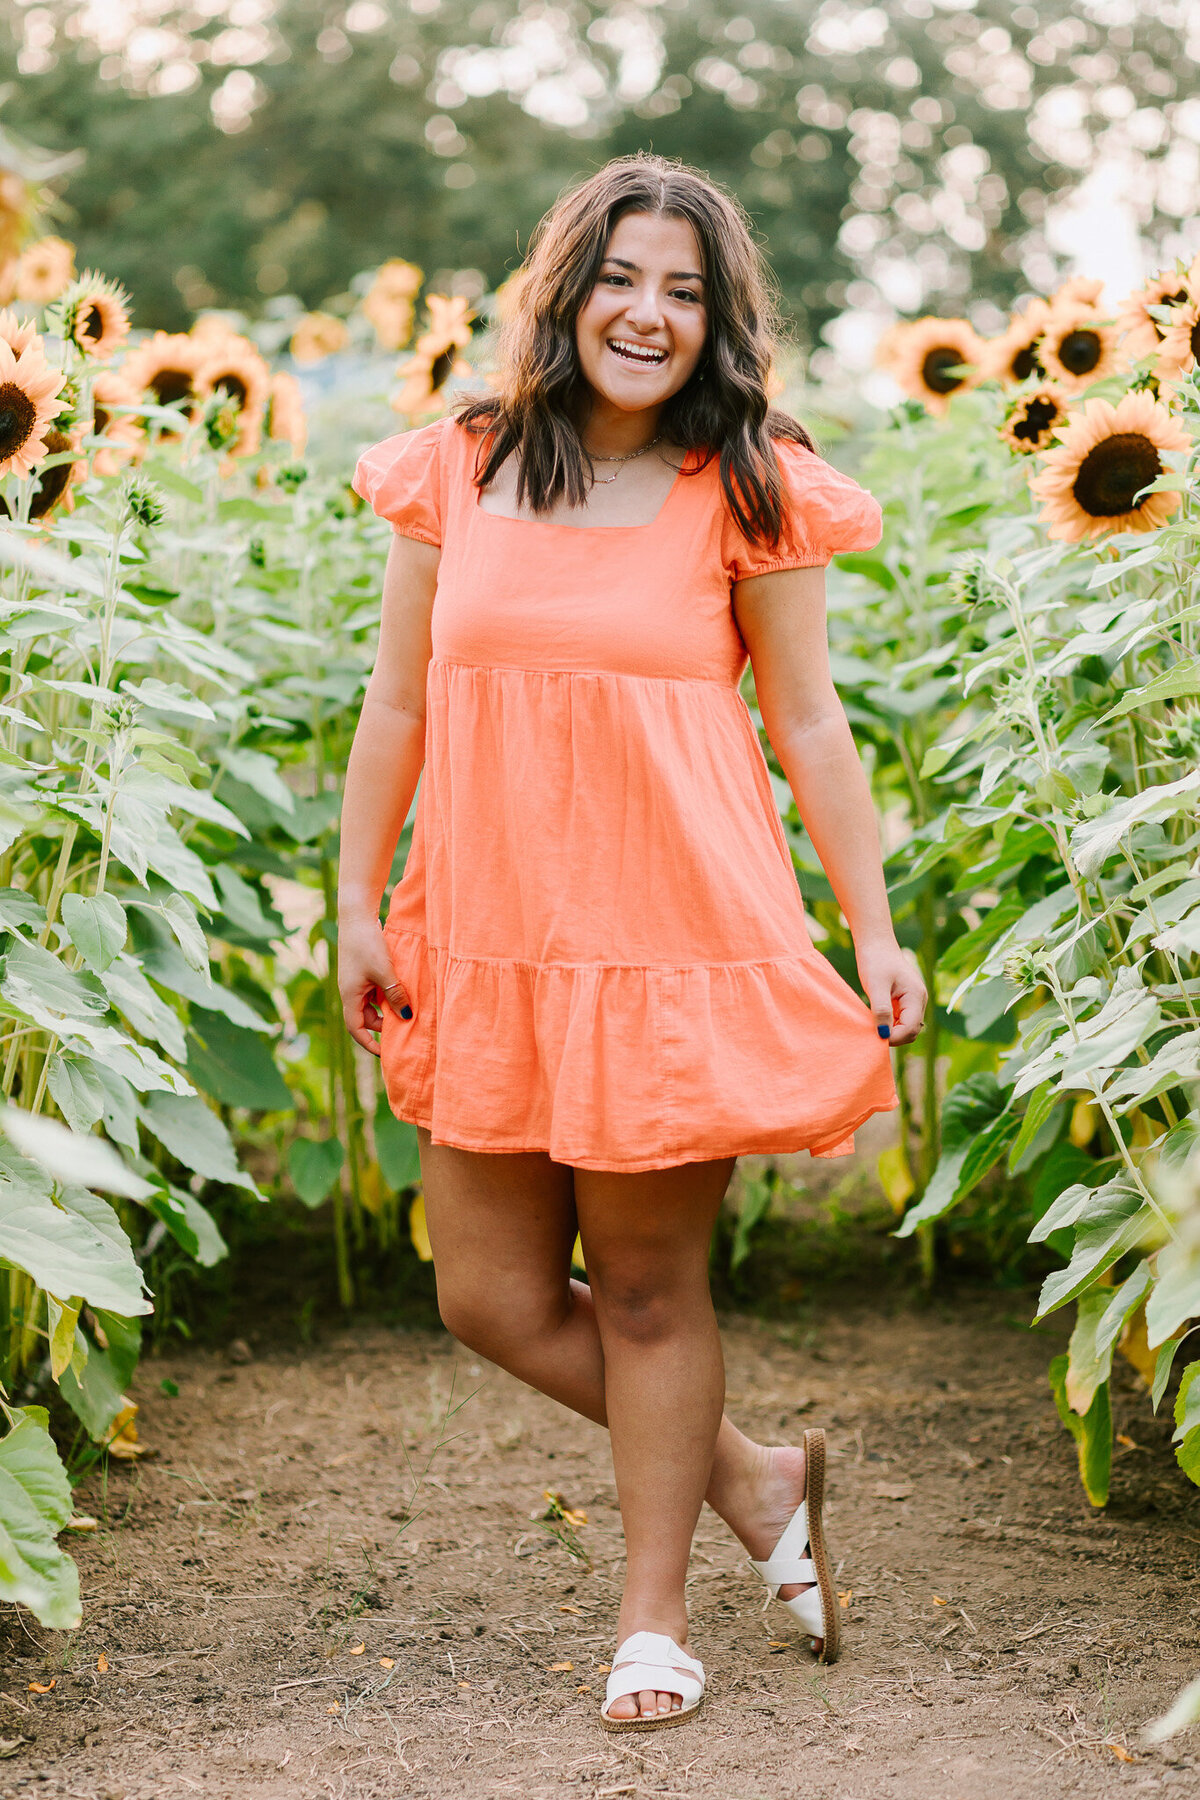 A teenage girl in a coral dress stands with one foot behind the other in a sunflower field